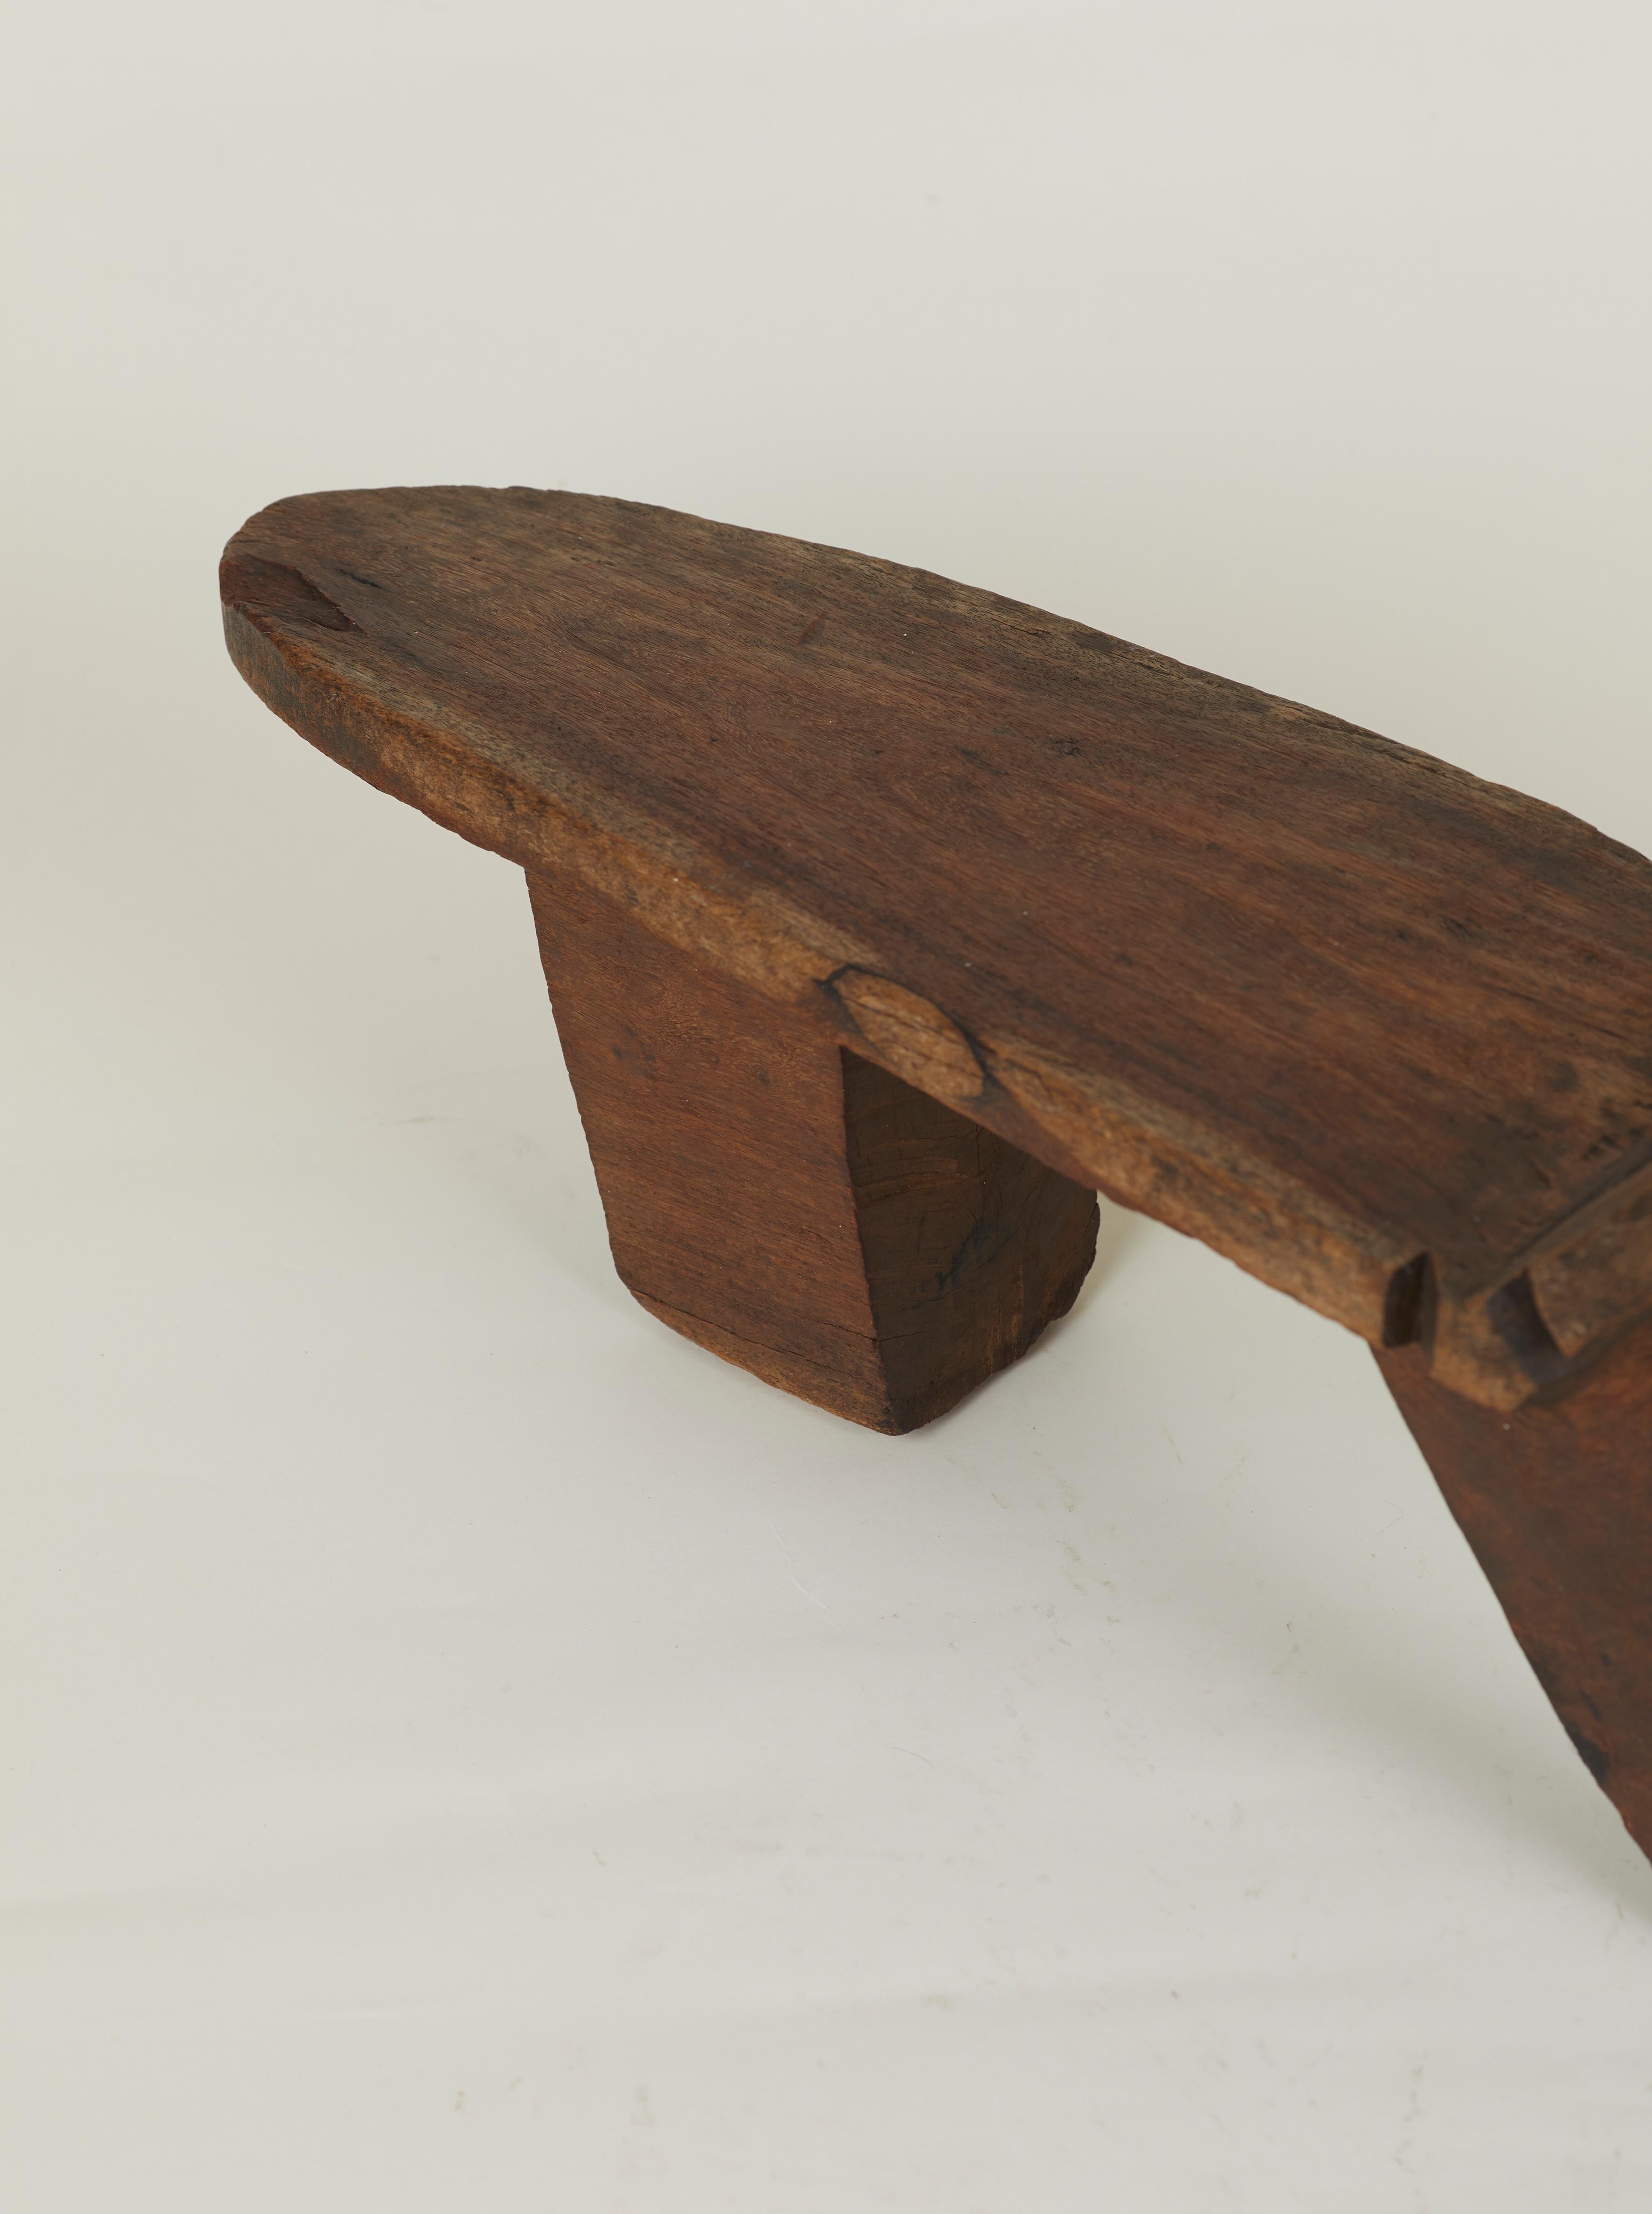 Hand carved reclining Lobi chair with geometric details, West Africa, circa 1940s-1950s. Made from a single block of Molave wood.

The Lobi people belong to an ethnic group that originated in what is today Ghana and now live across Burkina Faso, the